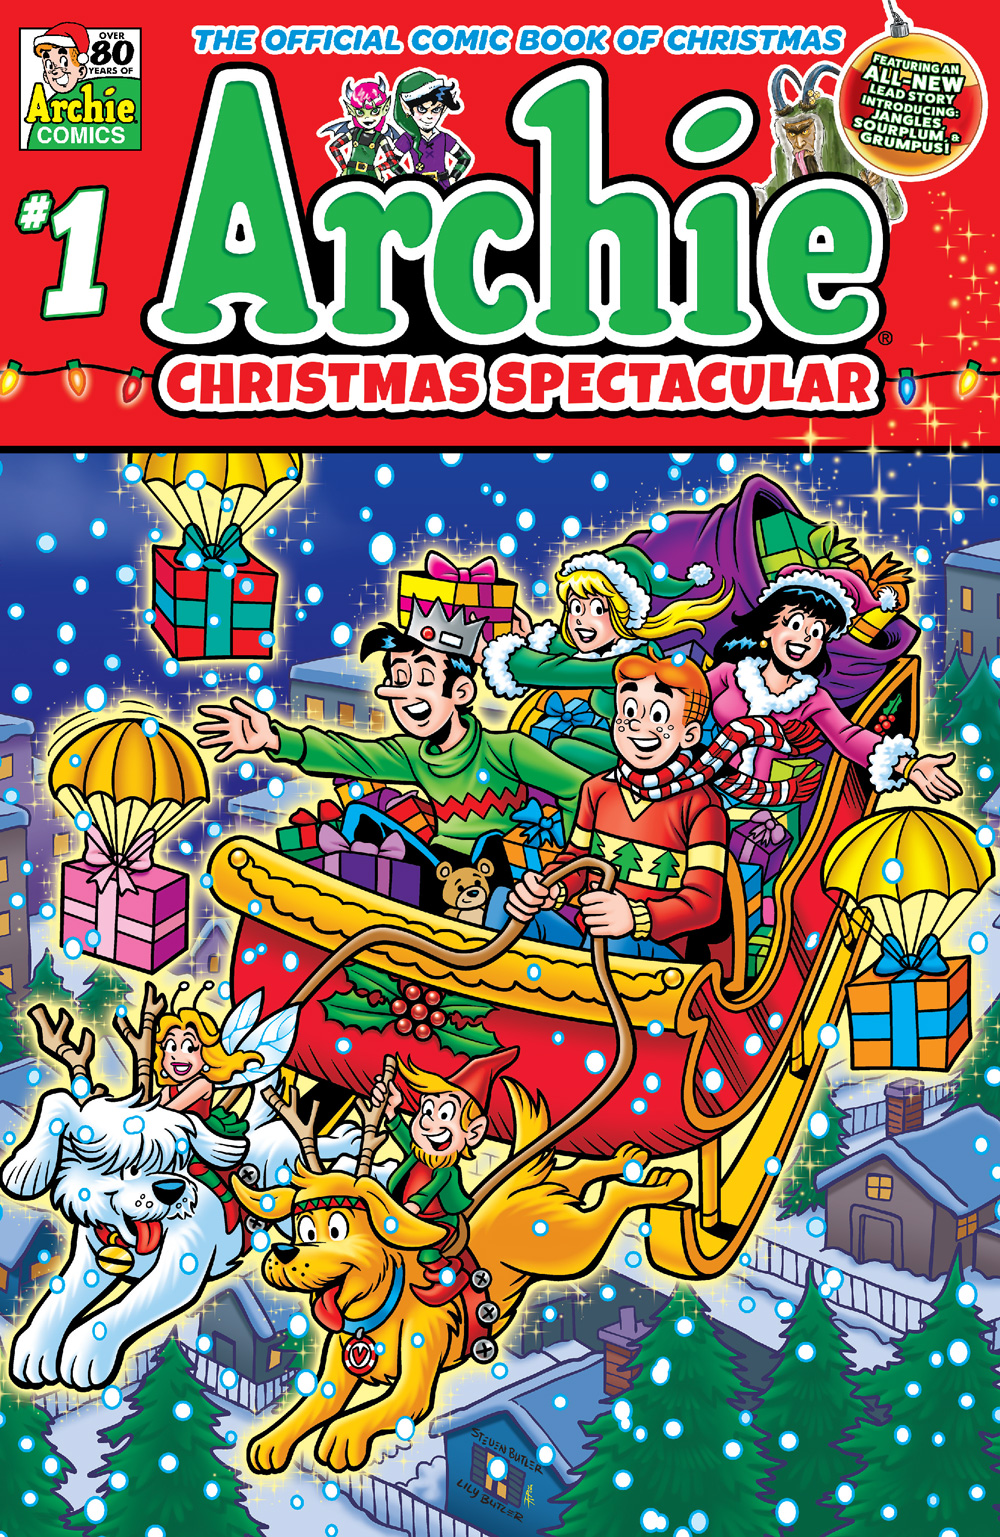 The cover of ARCHIE CHRISTMAS SPECTACULAR. Archie and all of his friends ride in Santa's sleigh at Christmastime, with Jingles the Elf and Sugarplum the Fairy.